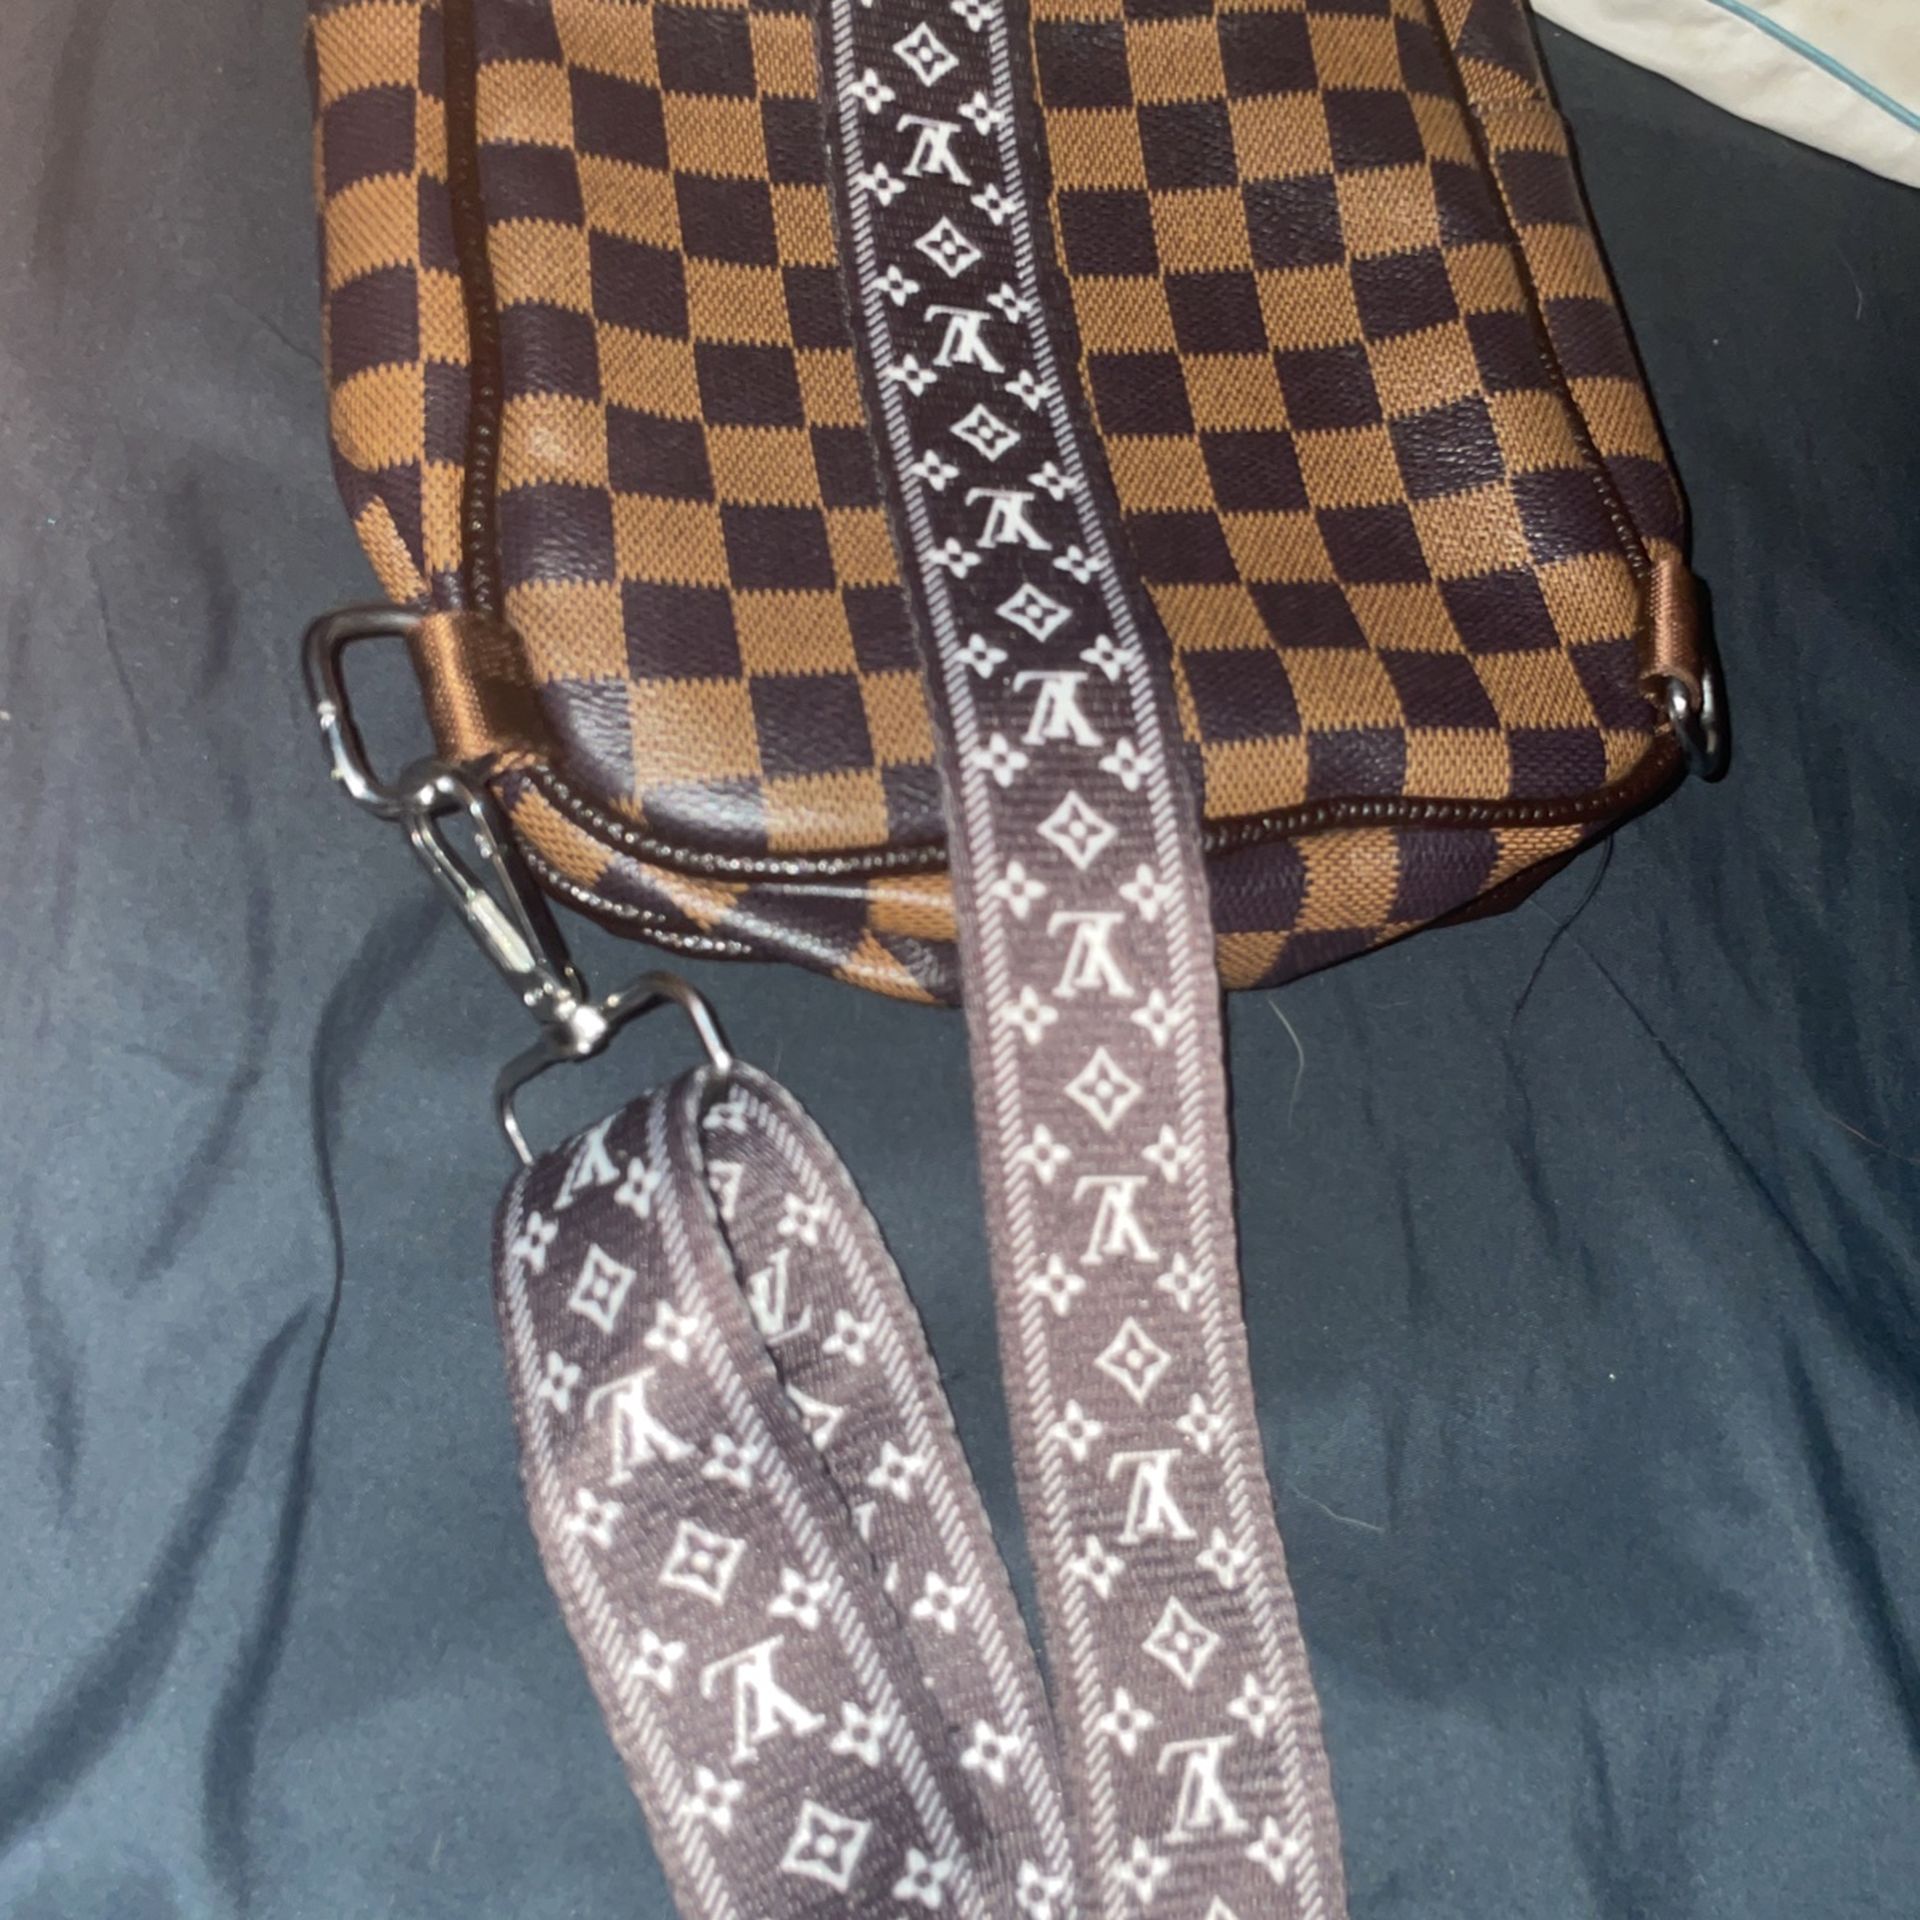 LV reporter purse for Sale in Edgewood, WA - OfferUp